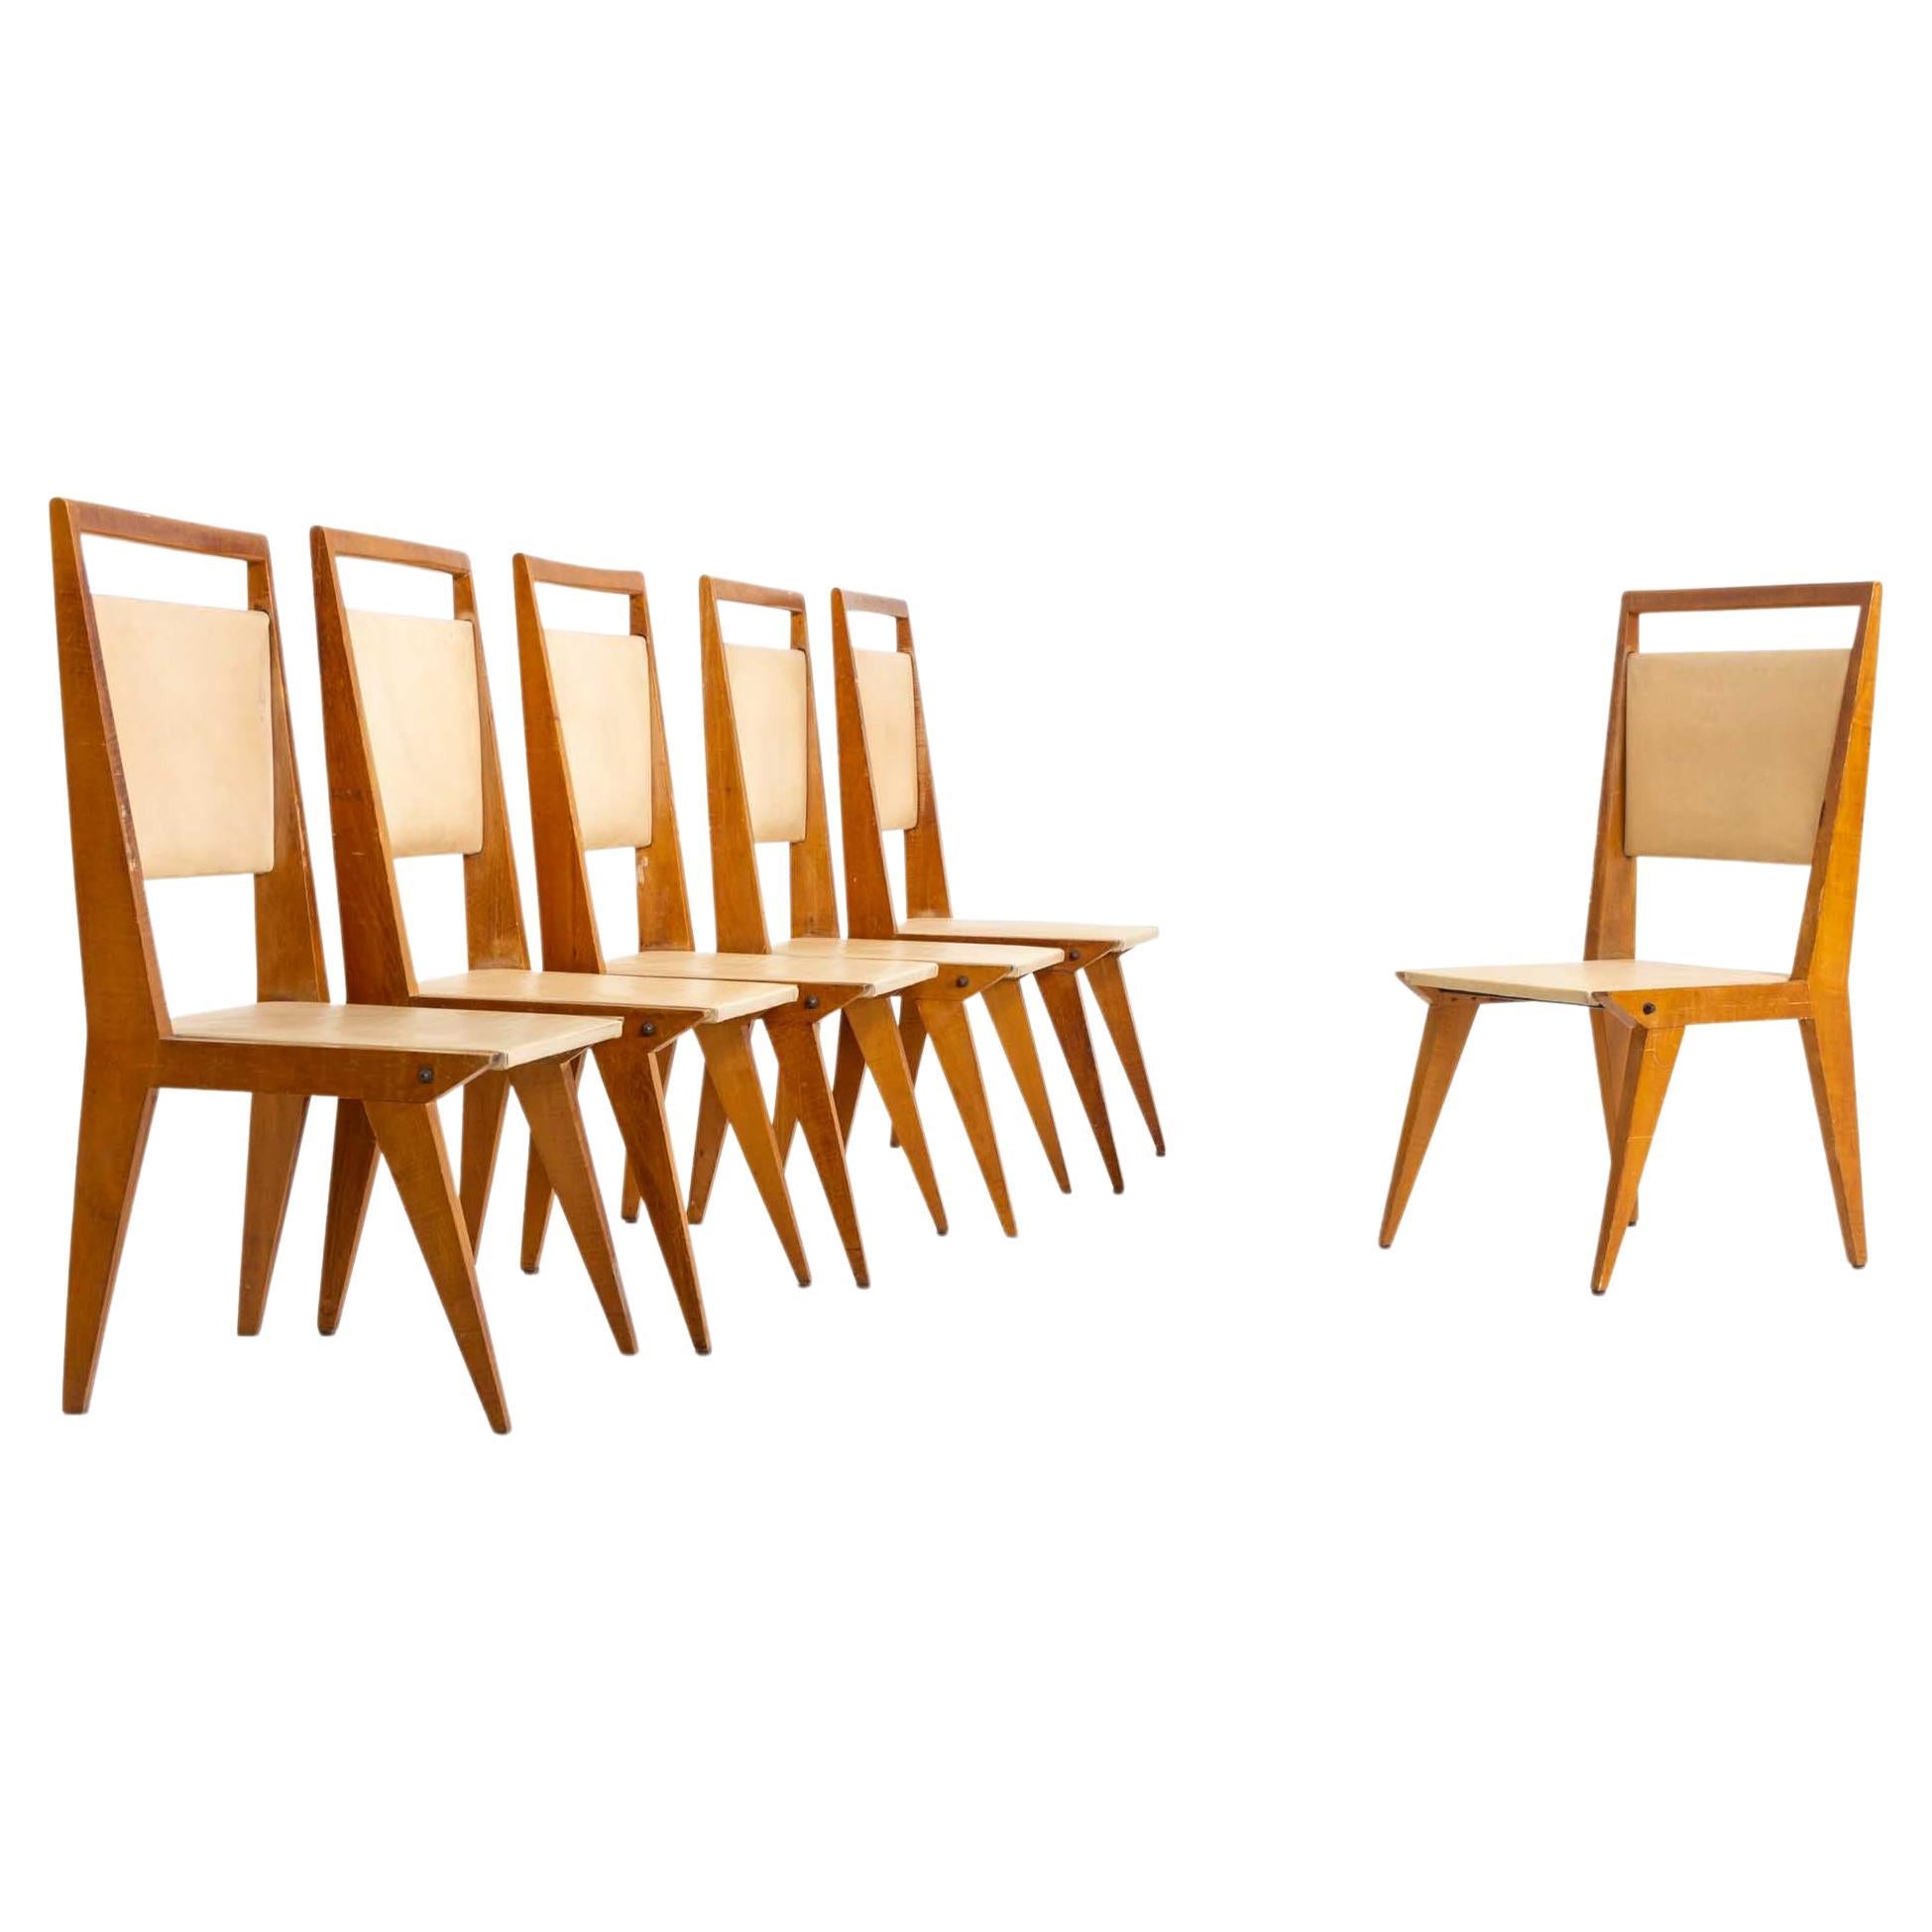 Dining Chairs, Designed by Vittorio Armellini, Italy, Mid-20th Century For Sale